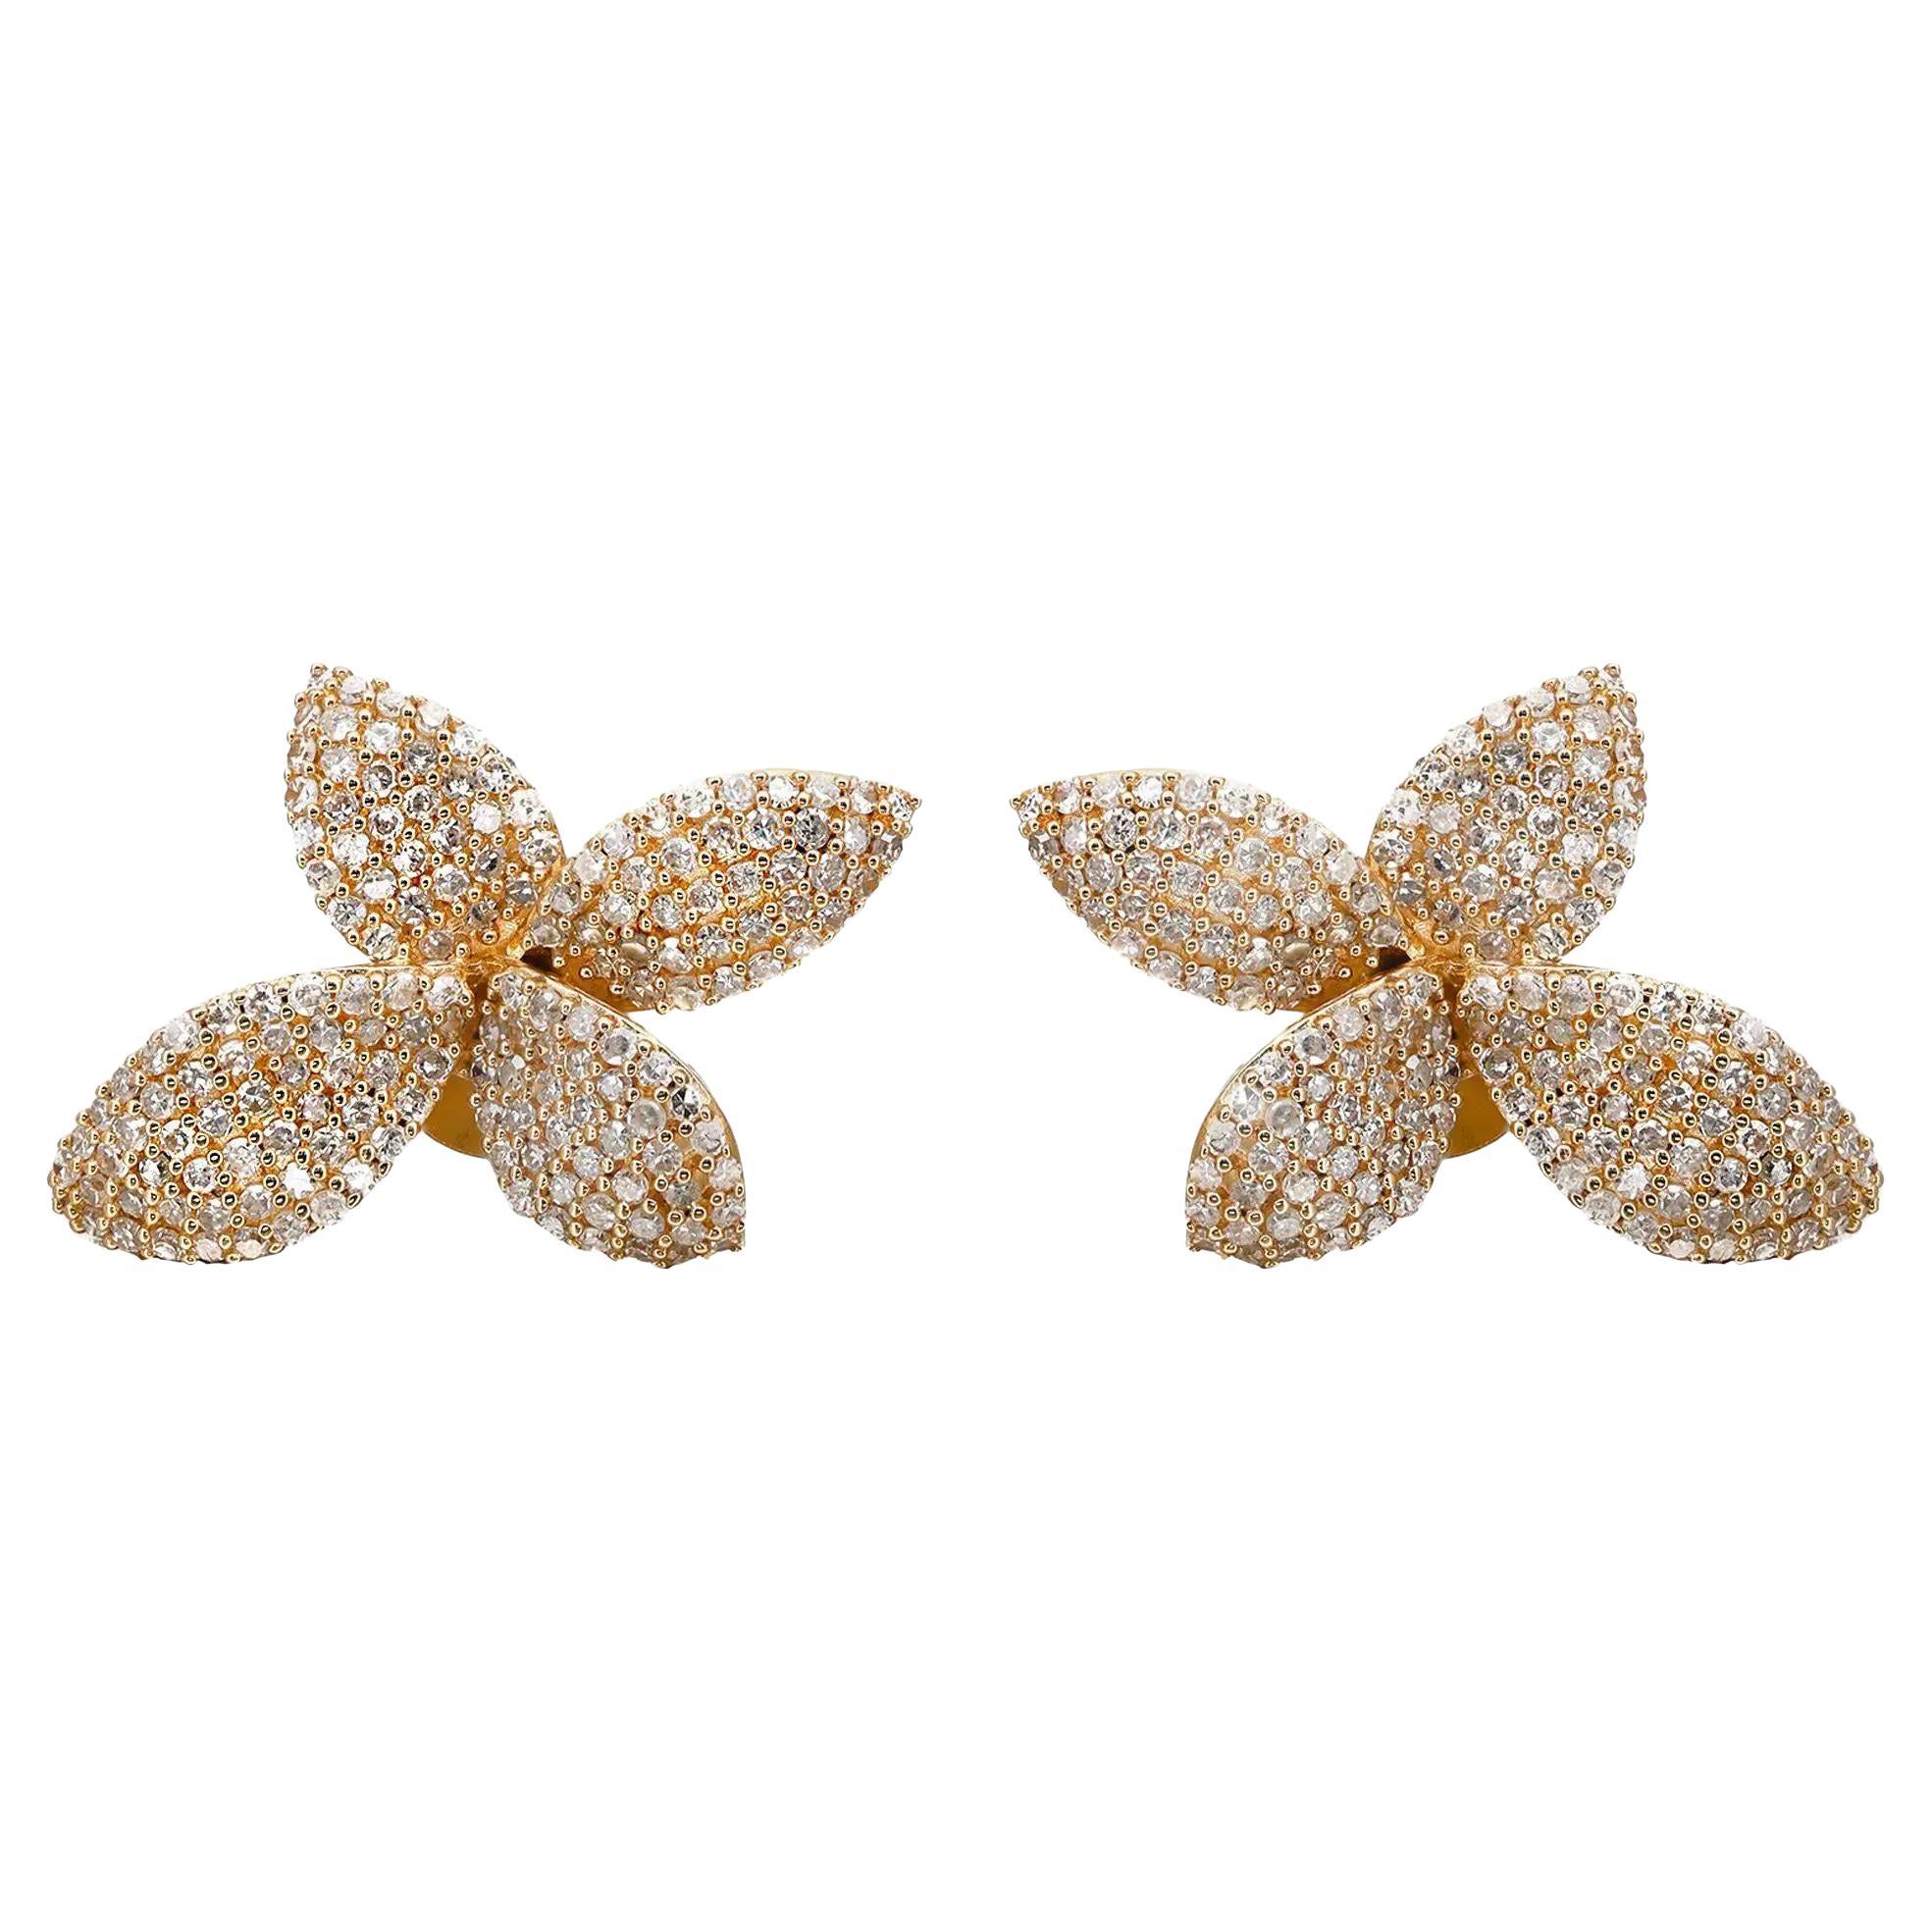 Pave Diamond Floral Earrings Round Cut In 14K Yellow Gold 1.00Cttw For Sale